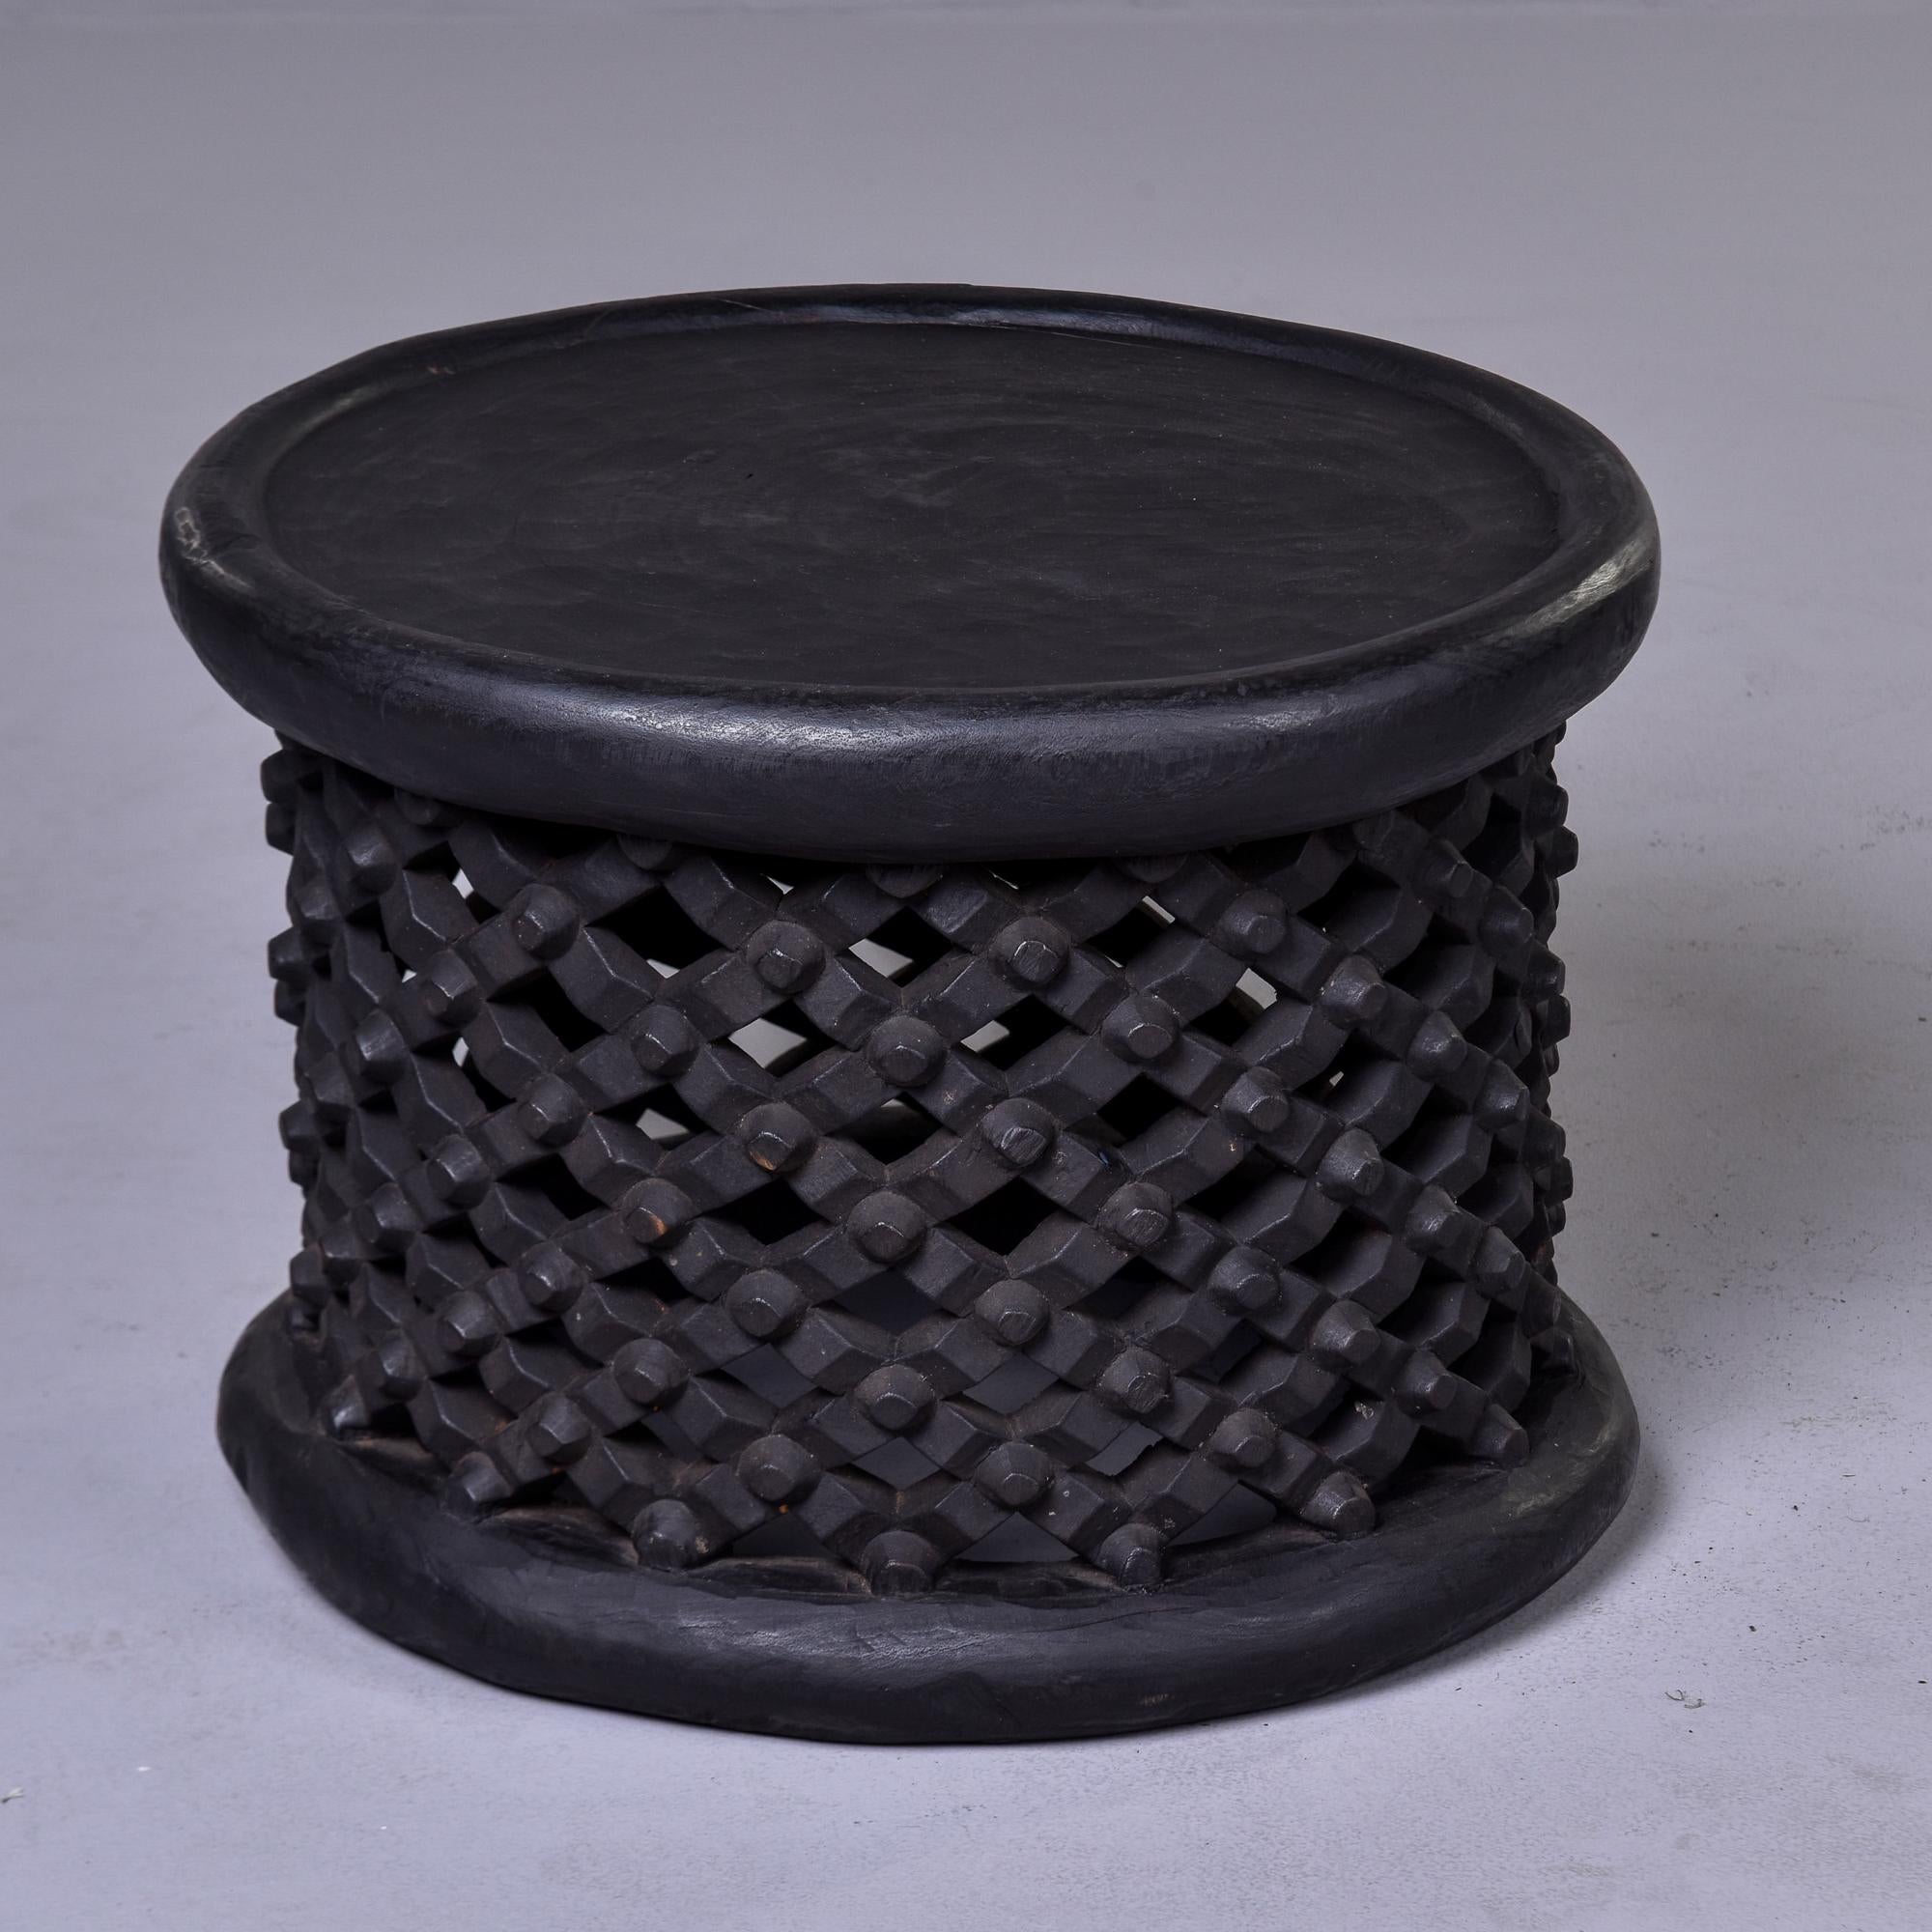 Vintage Hand Carved African Bamileke Stool or Table from Cameroon In Good Condition For Sale In Troy, MI